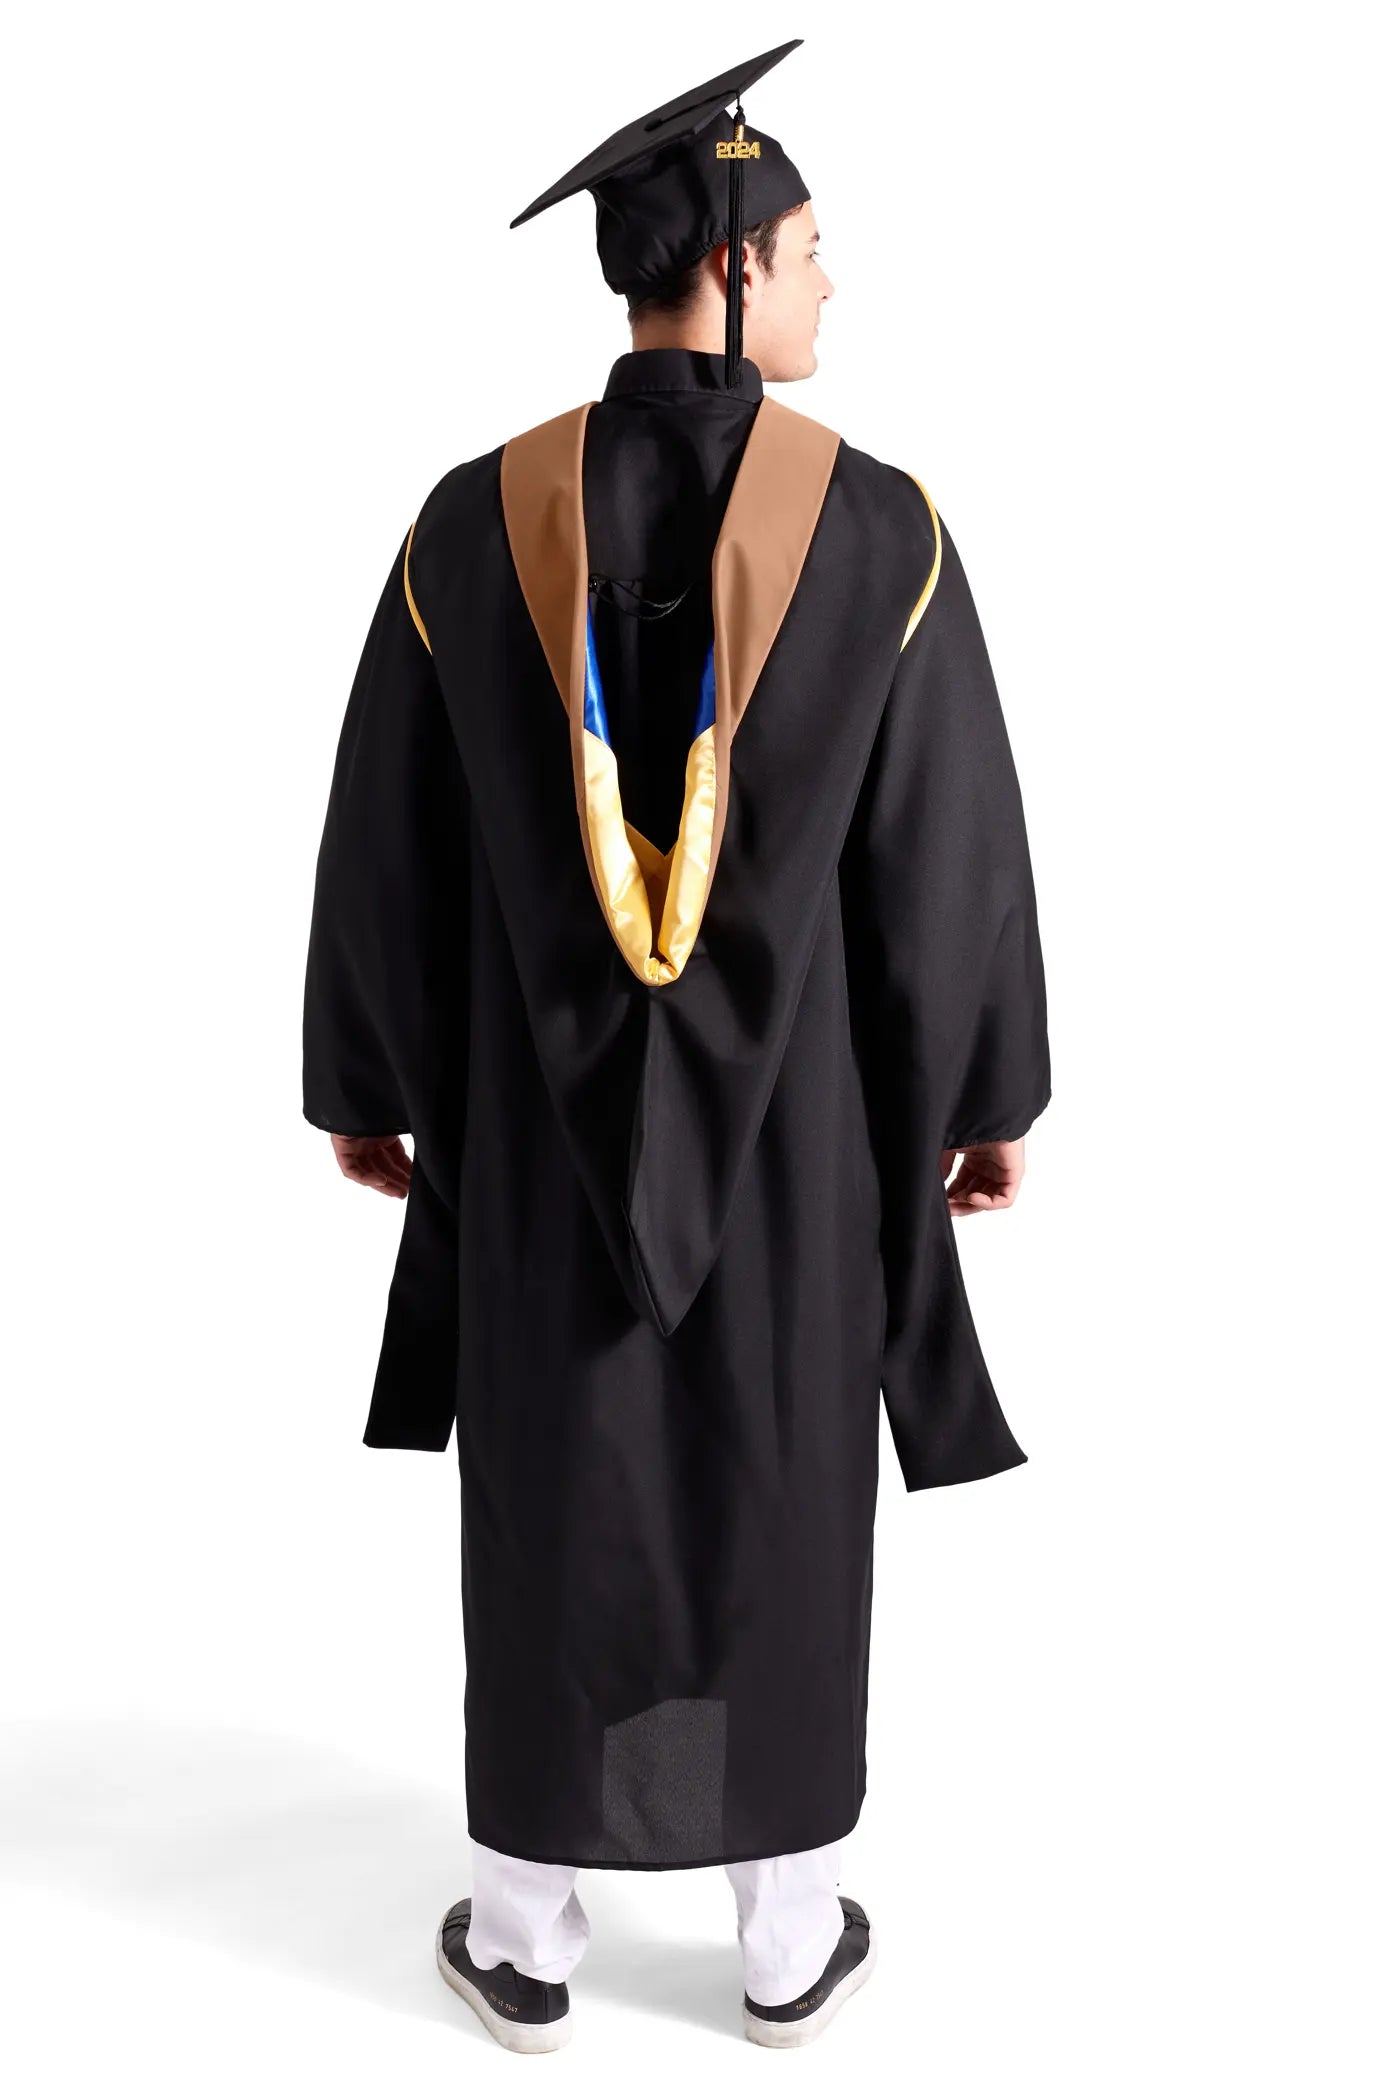 HAPPY TASSEL | UC Riverside Master's Regalia Set, include master's gown with pockets, mortarboard cap, drab hood, and tassel with year charm. | Business Degrees